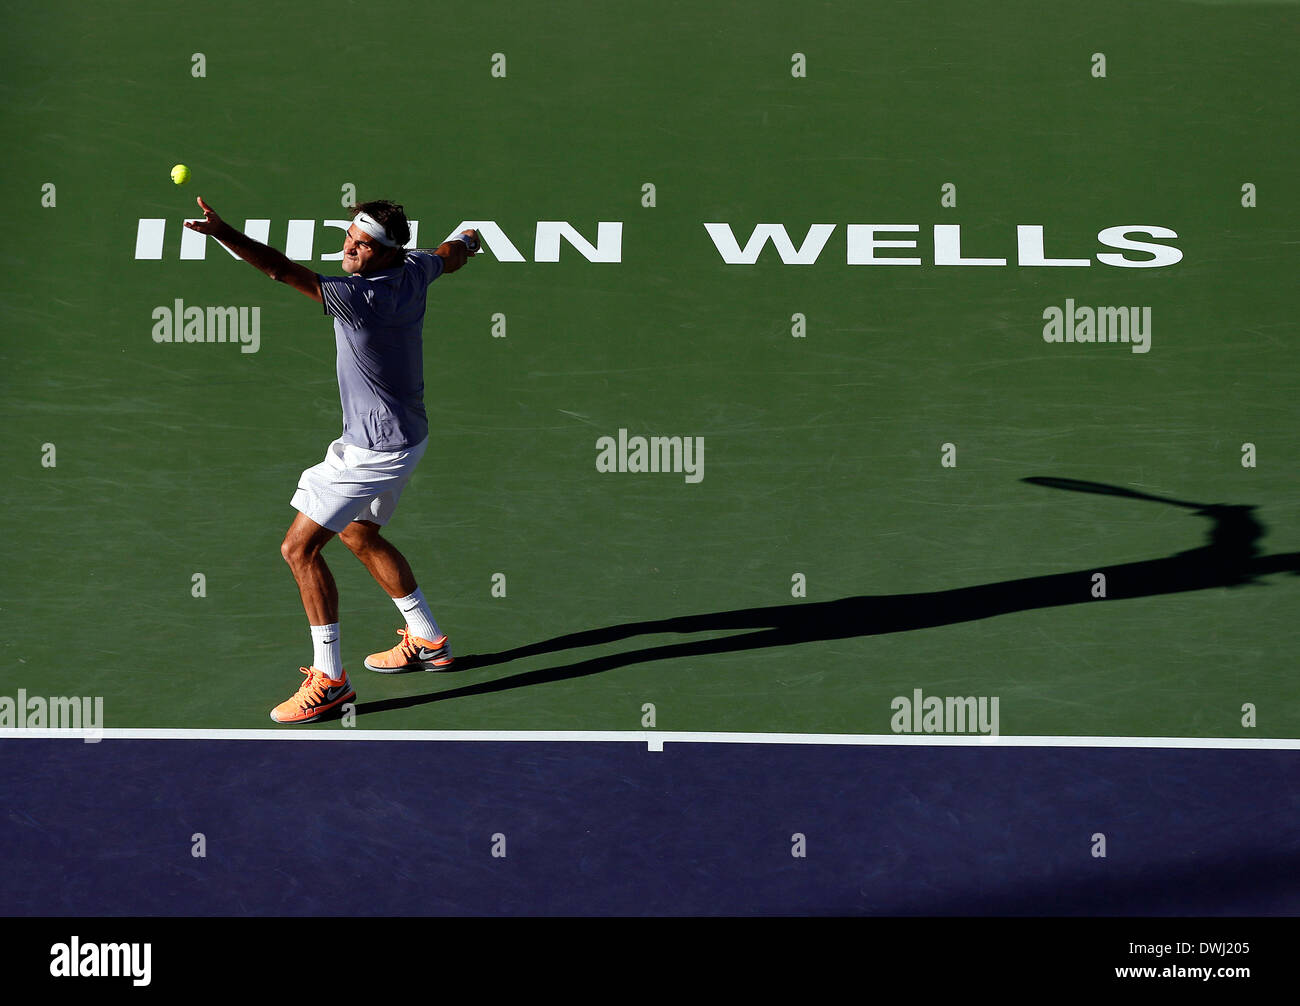 Indian Wells, California, USA. 08 March, 2014: Roger Federer of Switzerland serves to Paul-Henri Mathieu of France during the BNP Paribas Open at Indian Wells Tennis Garden in Indian Wells CA./Alamy Live News Stock Photo